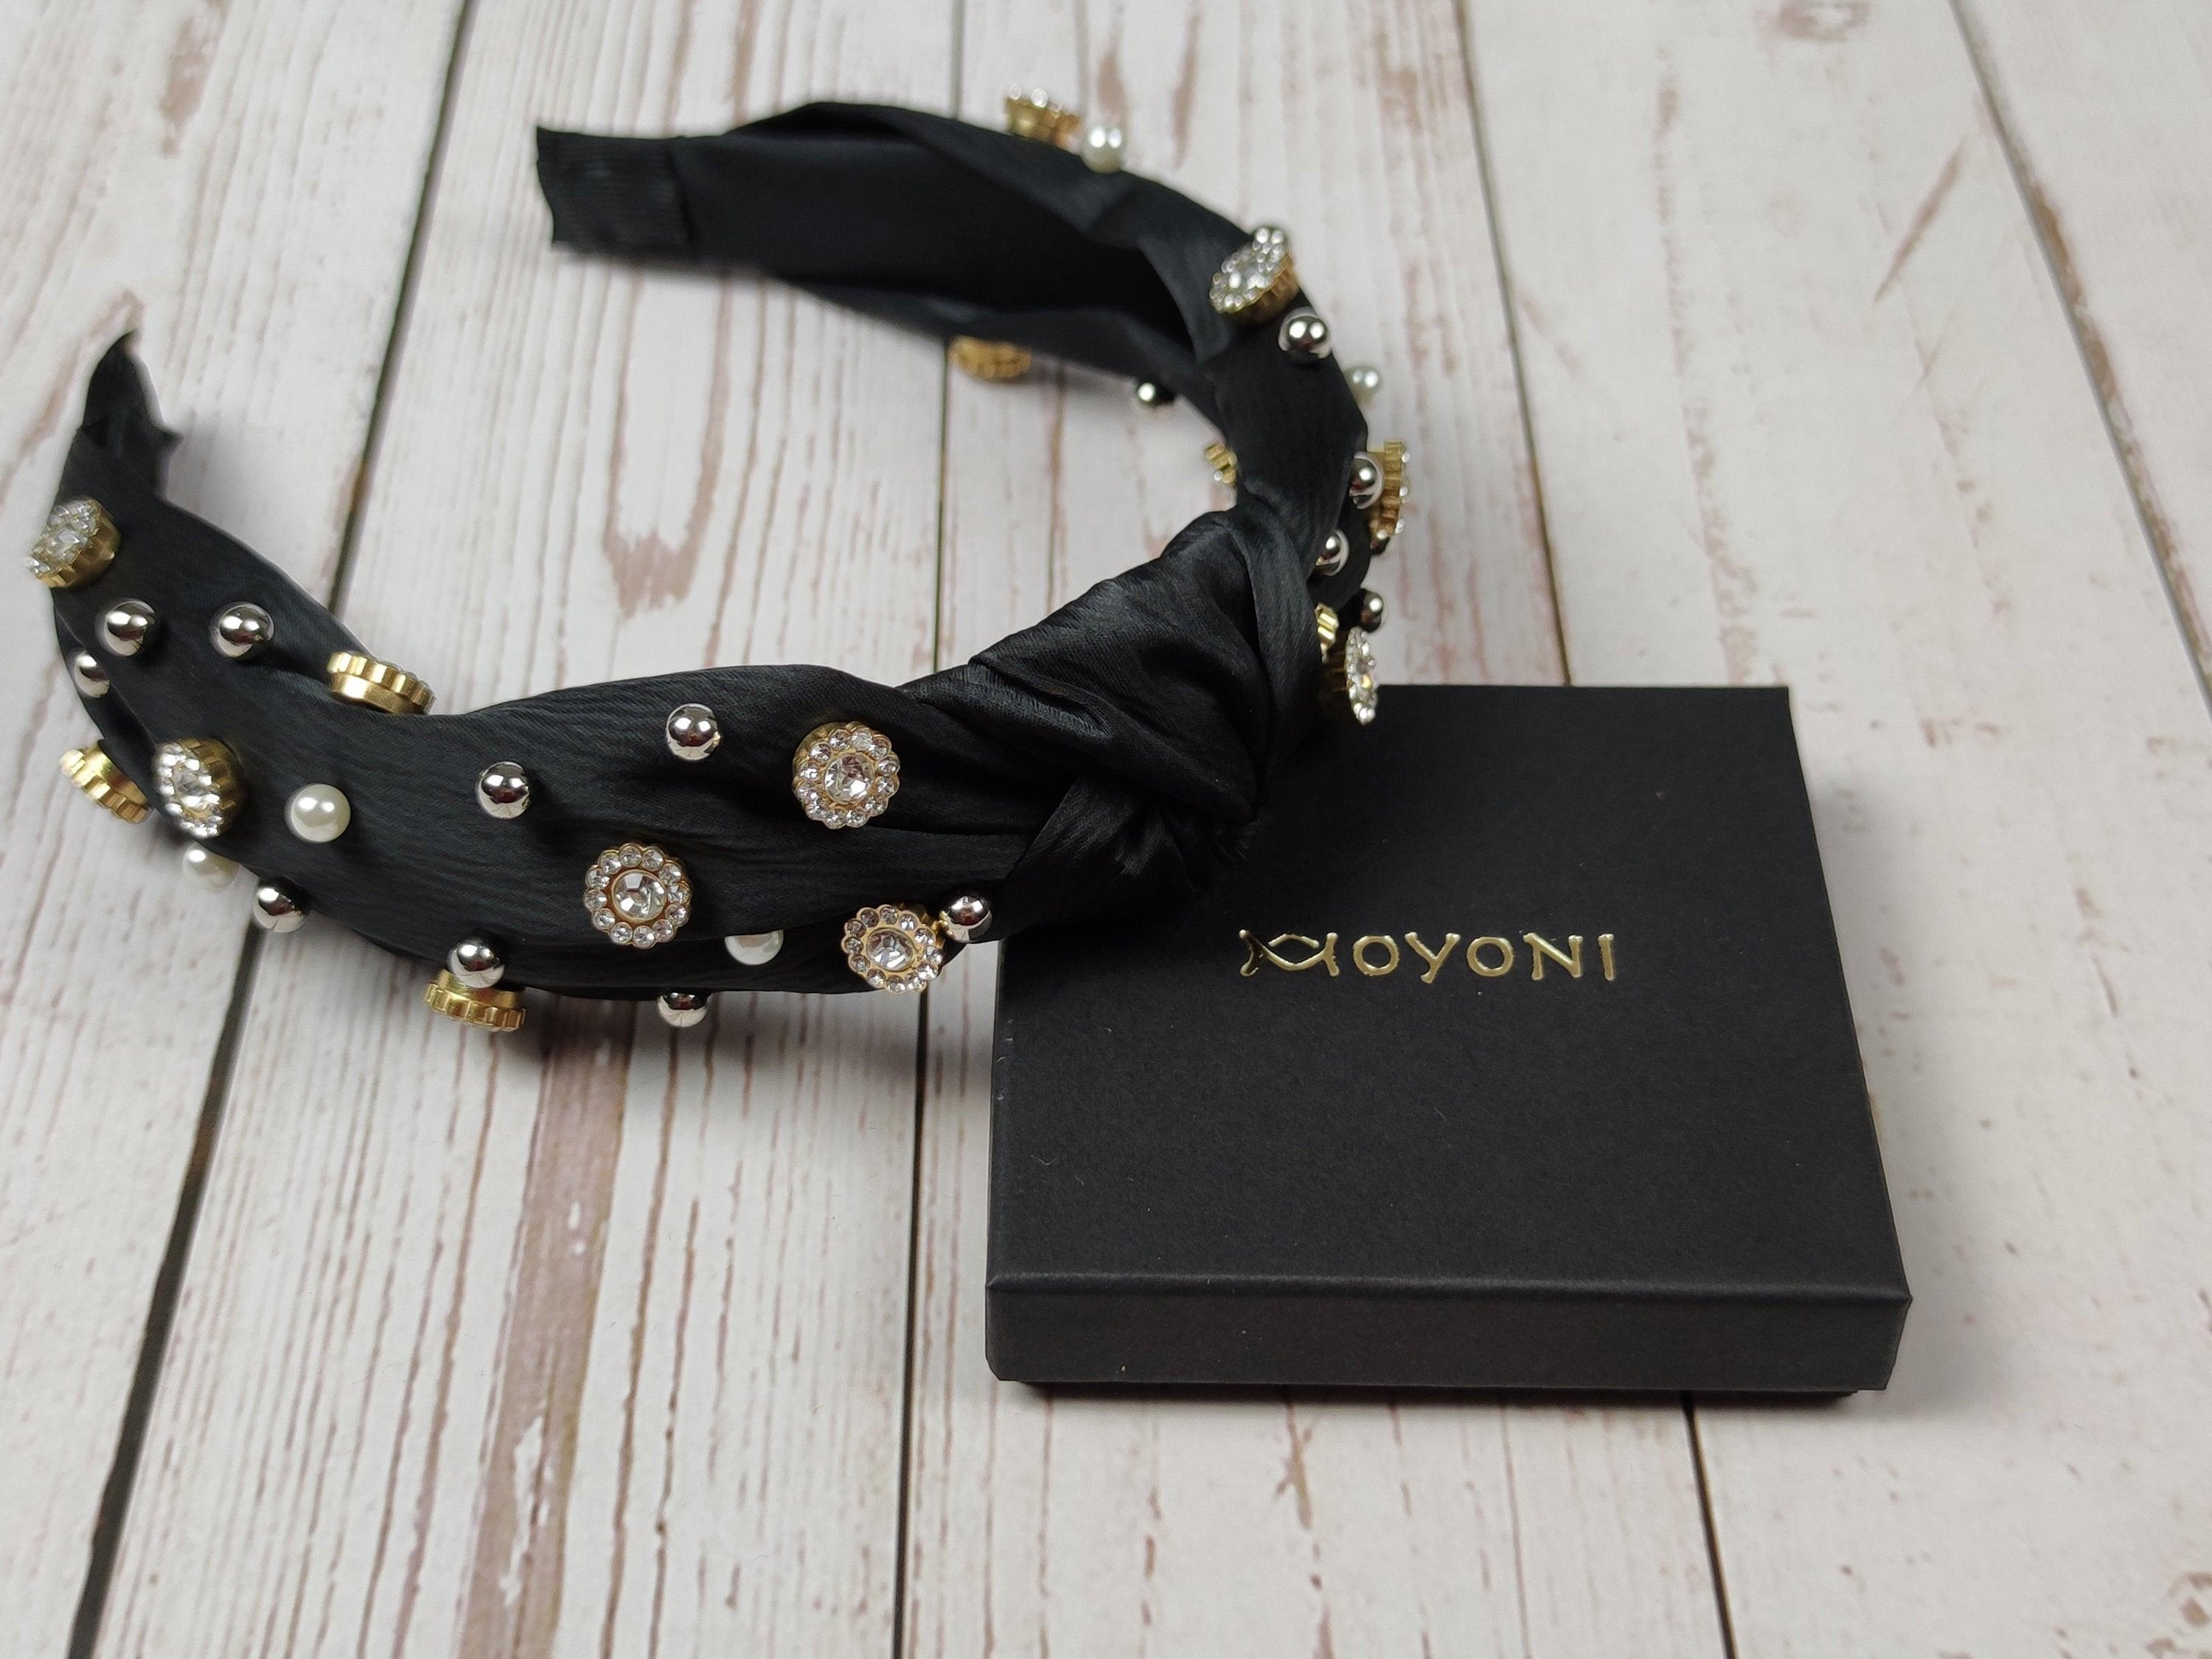 Trendy Boho Chic Black Satin Headband with Gemstone and Pearl Accent - Handmade Knot Design without Padding available at Moyoni Design